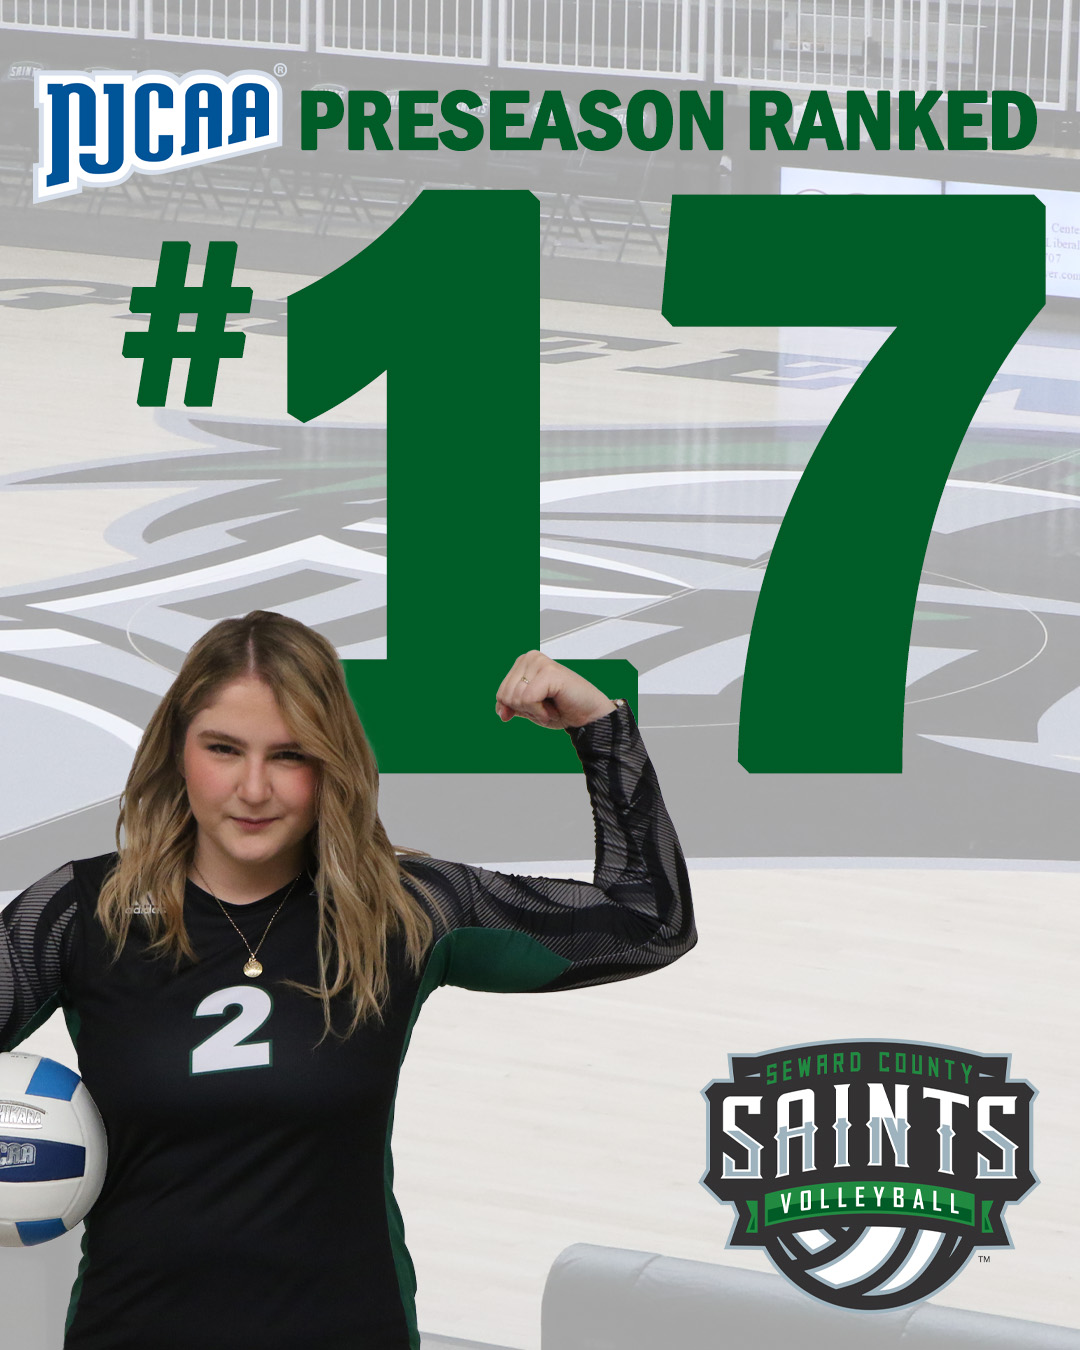 The Lady Saints enter the 2022 season No. 17 in the NJCAA